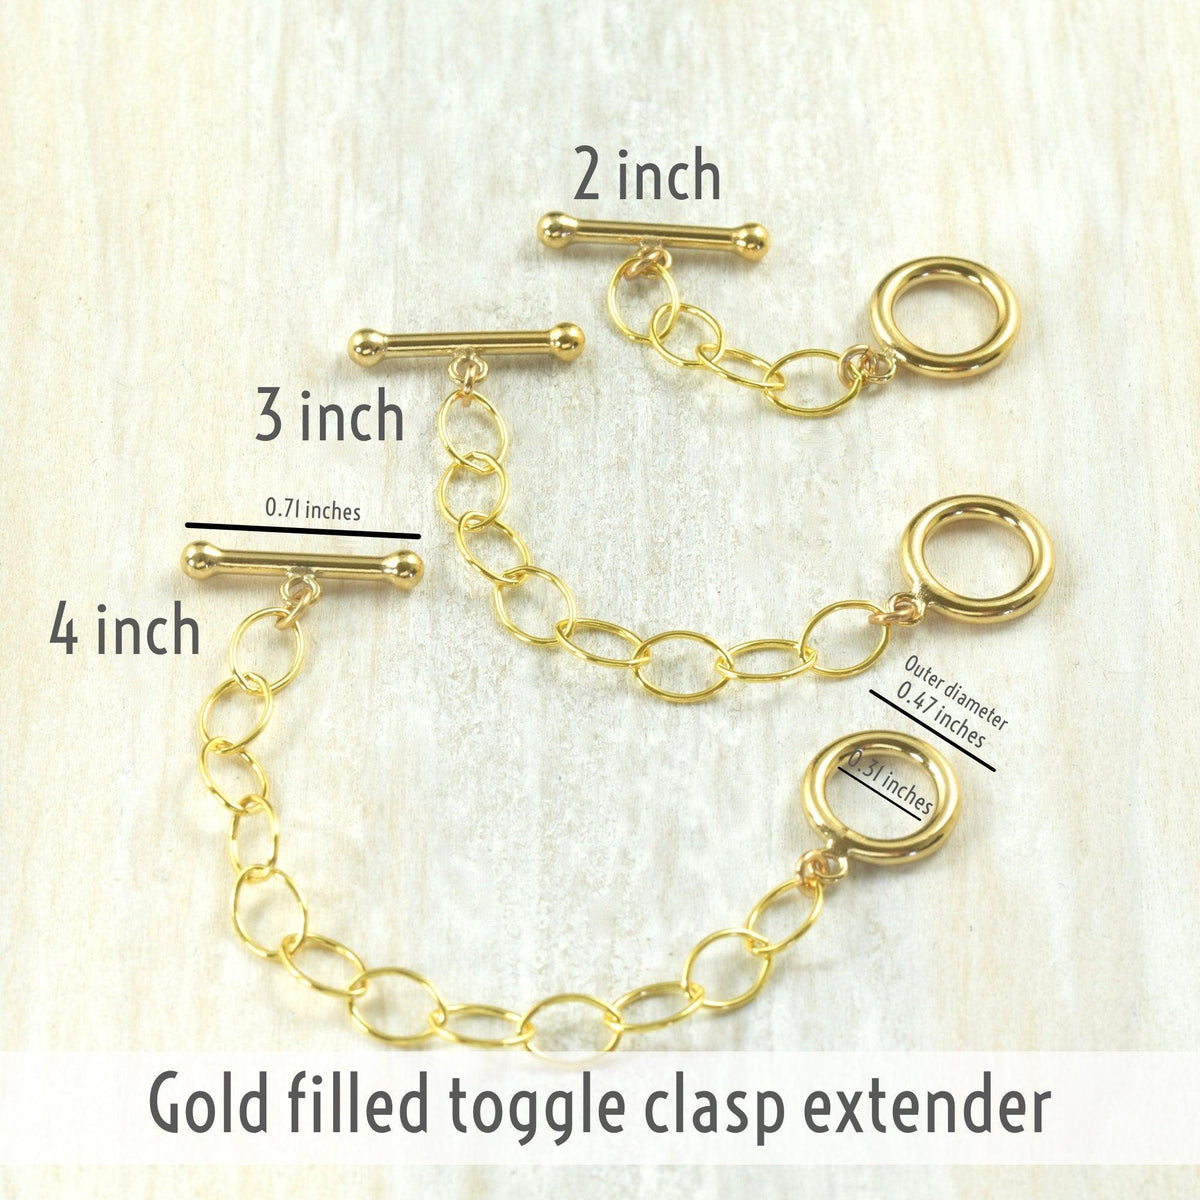 Gold filled Toggle clasp extender necklace extension 2 inch, 3 inch, 4 inch